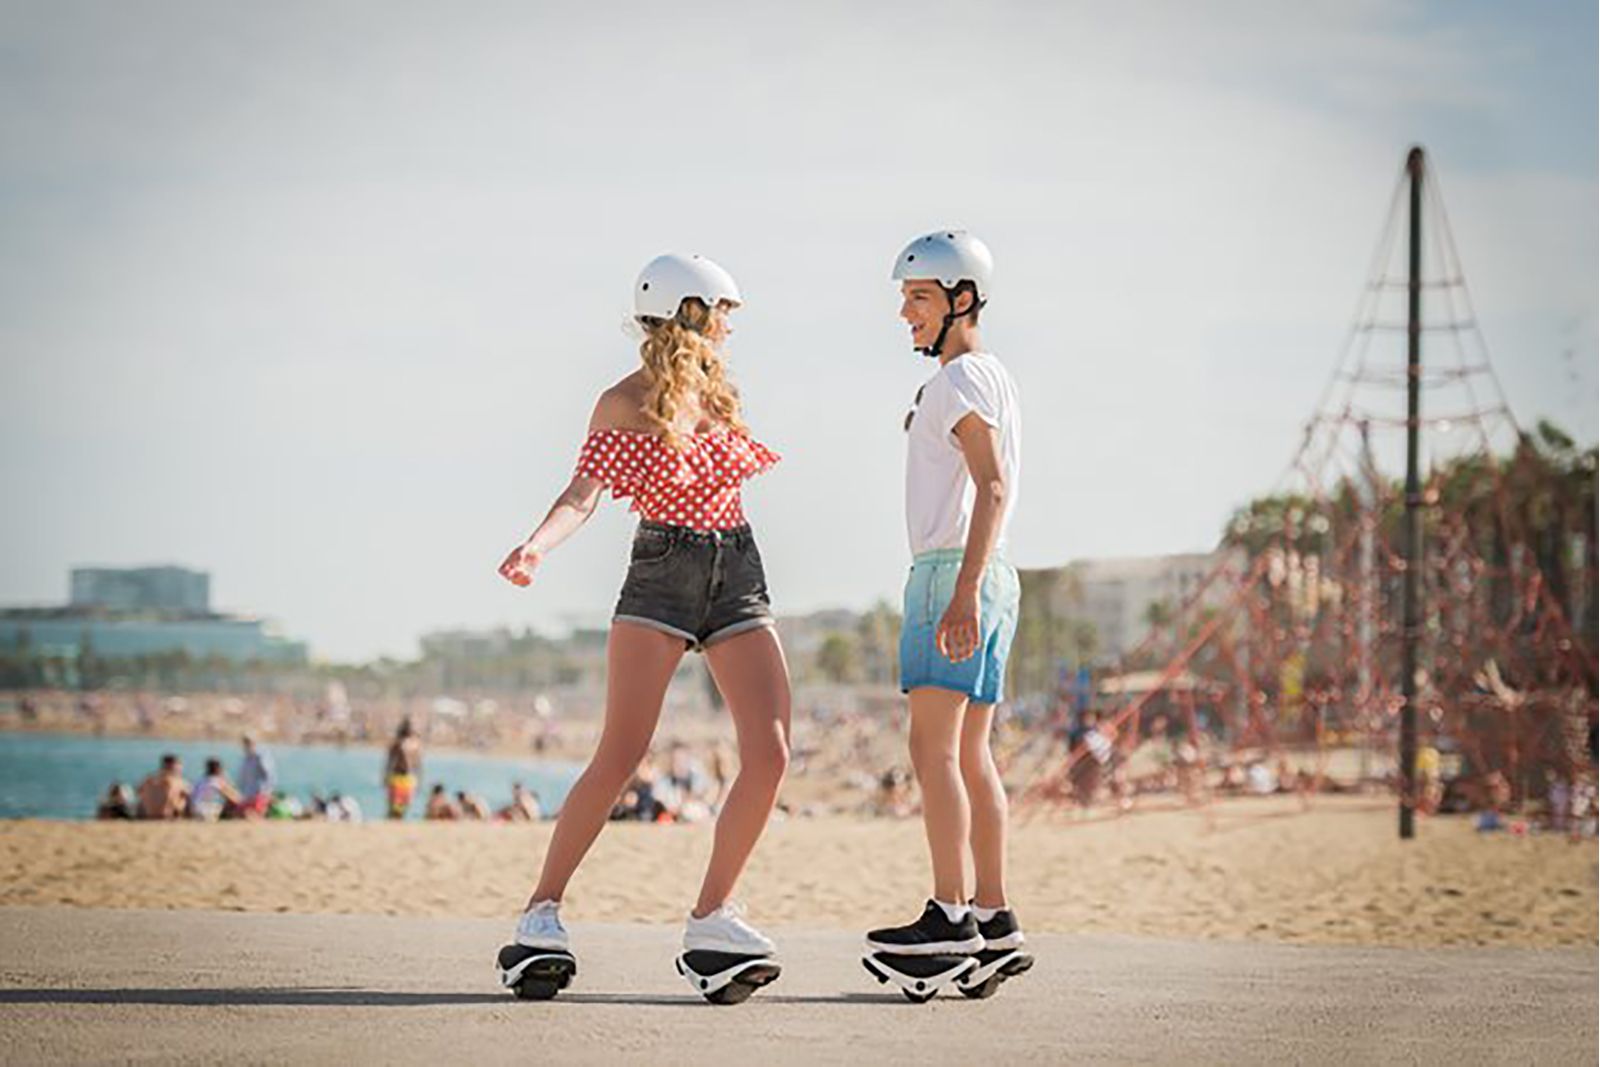 Segway Just Killed The Hoverboard With Its Funky Drift W1 E-skates image 2